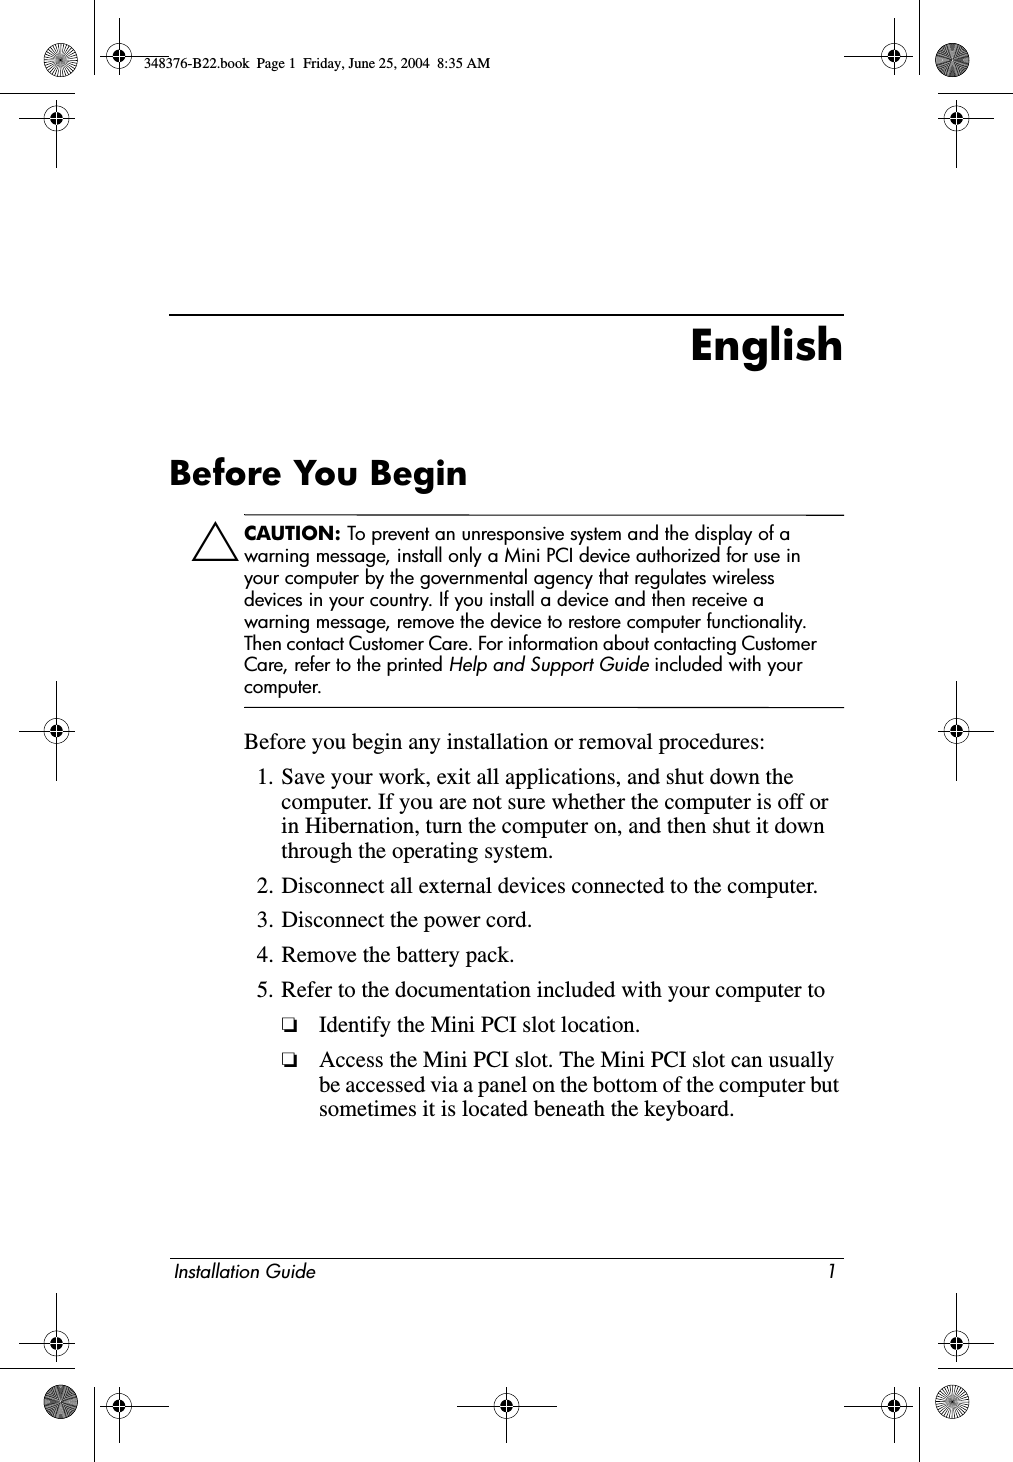 Installation Guide 1EnglishBefore You BeginÄCAUTION: To prevent an unresponsive system and the display of a warning message, install only a Mini PCI device authorized for use in your computer by the governmental agency that regulates wireless devices in your country. If you install a device and then receive a warning message, remove the device to restore computer functionality. Then contact Customer Care. For information about contacting Customer Care, refer to the printed Help and Support Guide included with your computer.Before you begin any installation or removal procedures:1. Save your work, exit all applications, and shut down the computer. If you are not sure whether the computer is off or in Hibernation, turn the computer on, and then shut it down through the operating system.2. Disconnect all external devices connected to the computer.3. Disconnect the power cord.4. Remove the battery pack.5. Refer to the documentation included with your computer to❏Identify the Mini PCI slot location.❏Access the Mini PCI slot. The Mini PCI slot can usually be accessed via a panel on the bottom of the computer but sometimes it is located beneath the keyboard.348376-B22.book  Page 1  Friday, June 25, 2004  8:35 AM